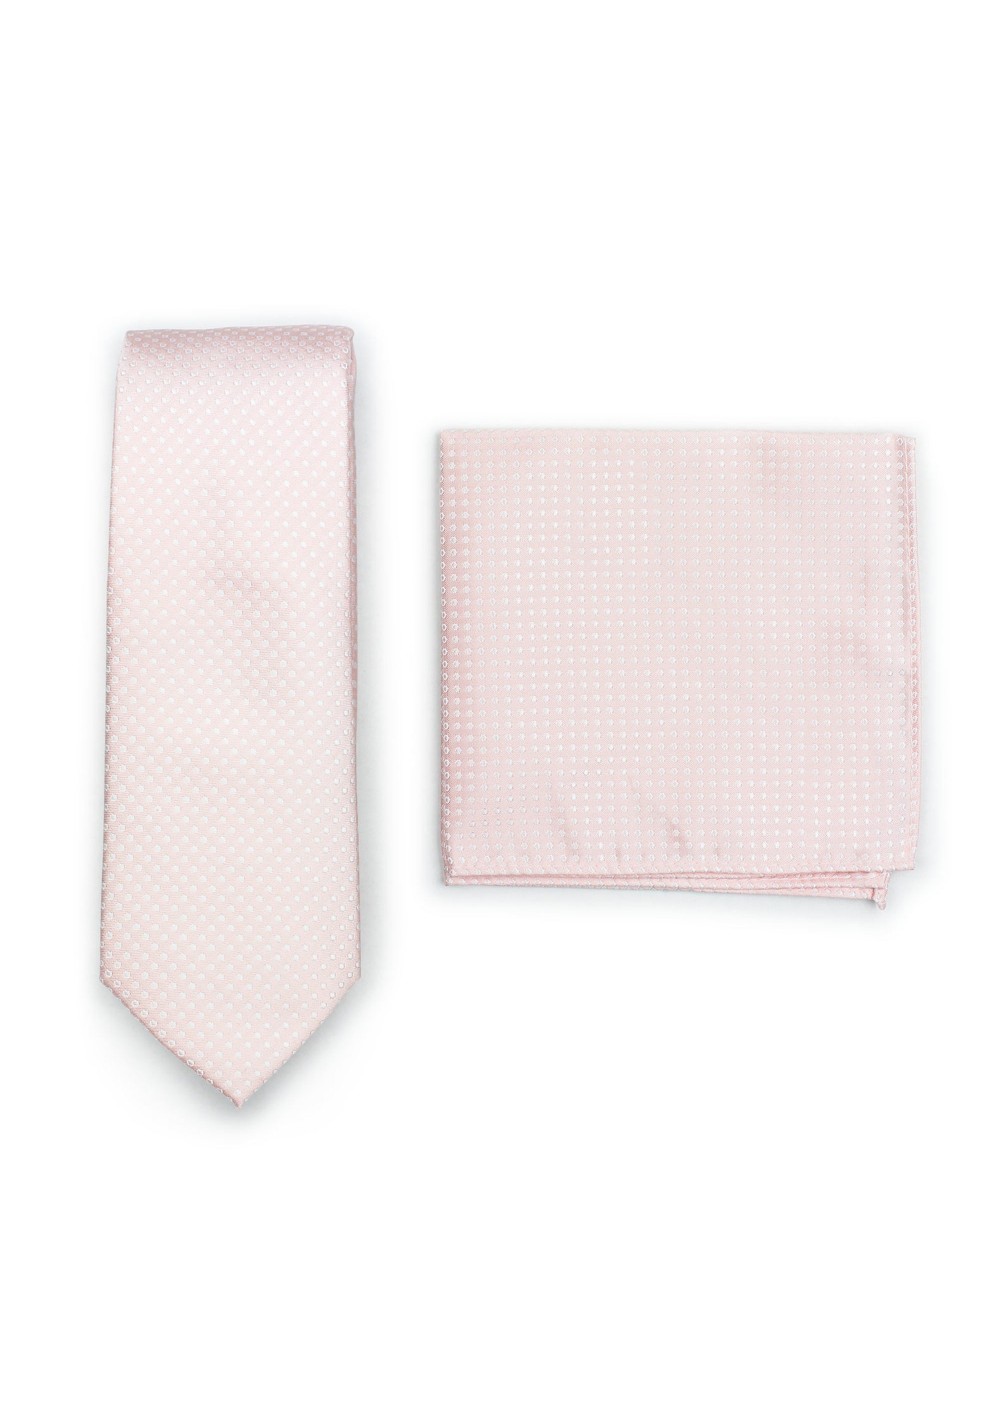 Blush Pink Tie and Hanky Set